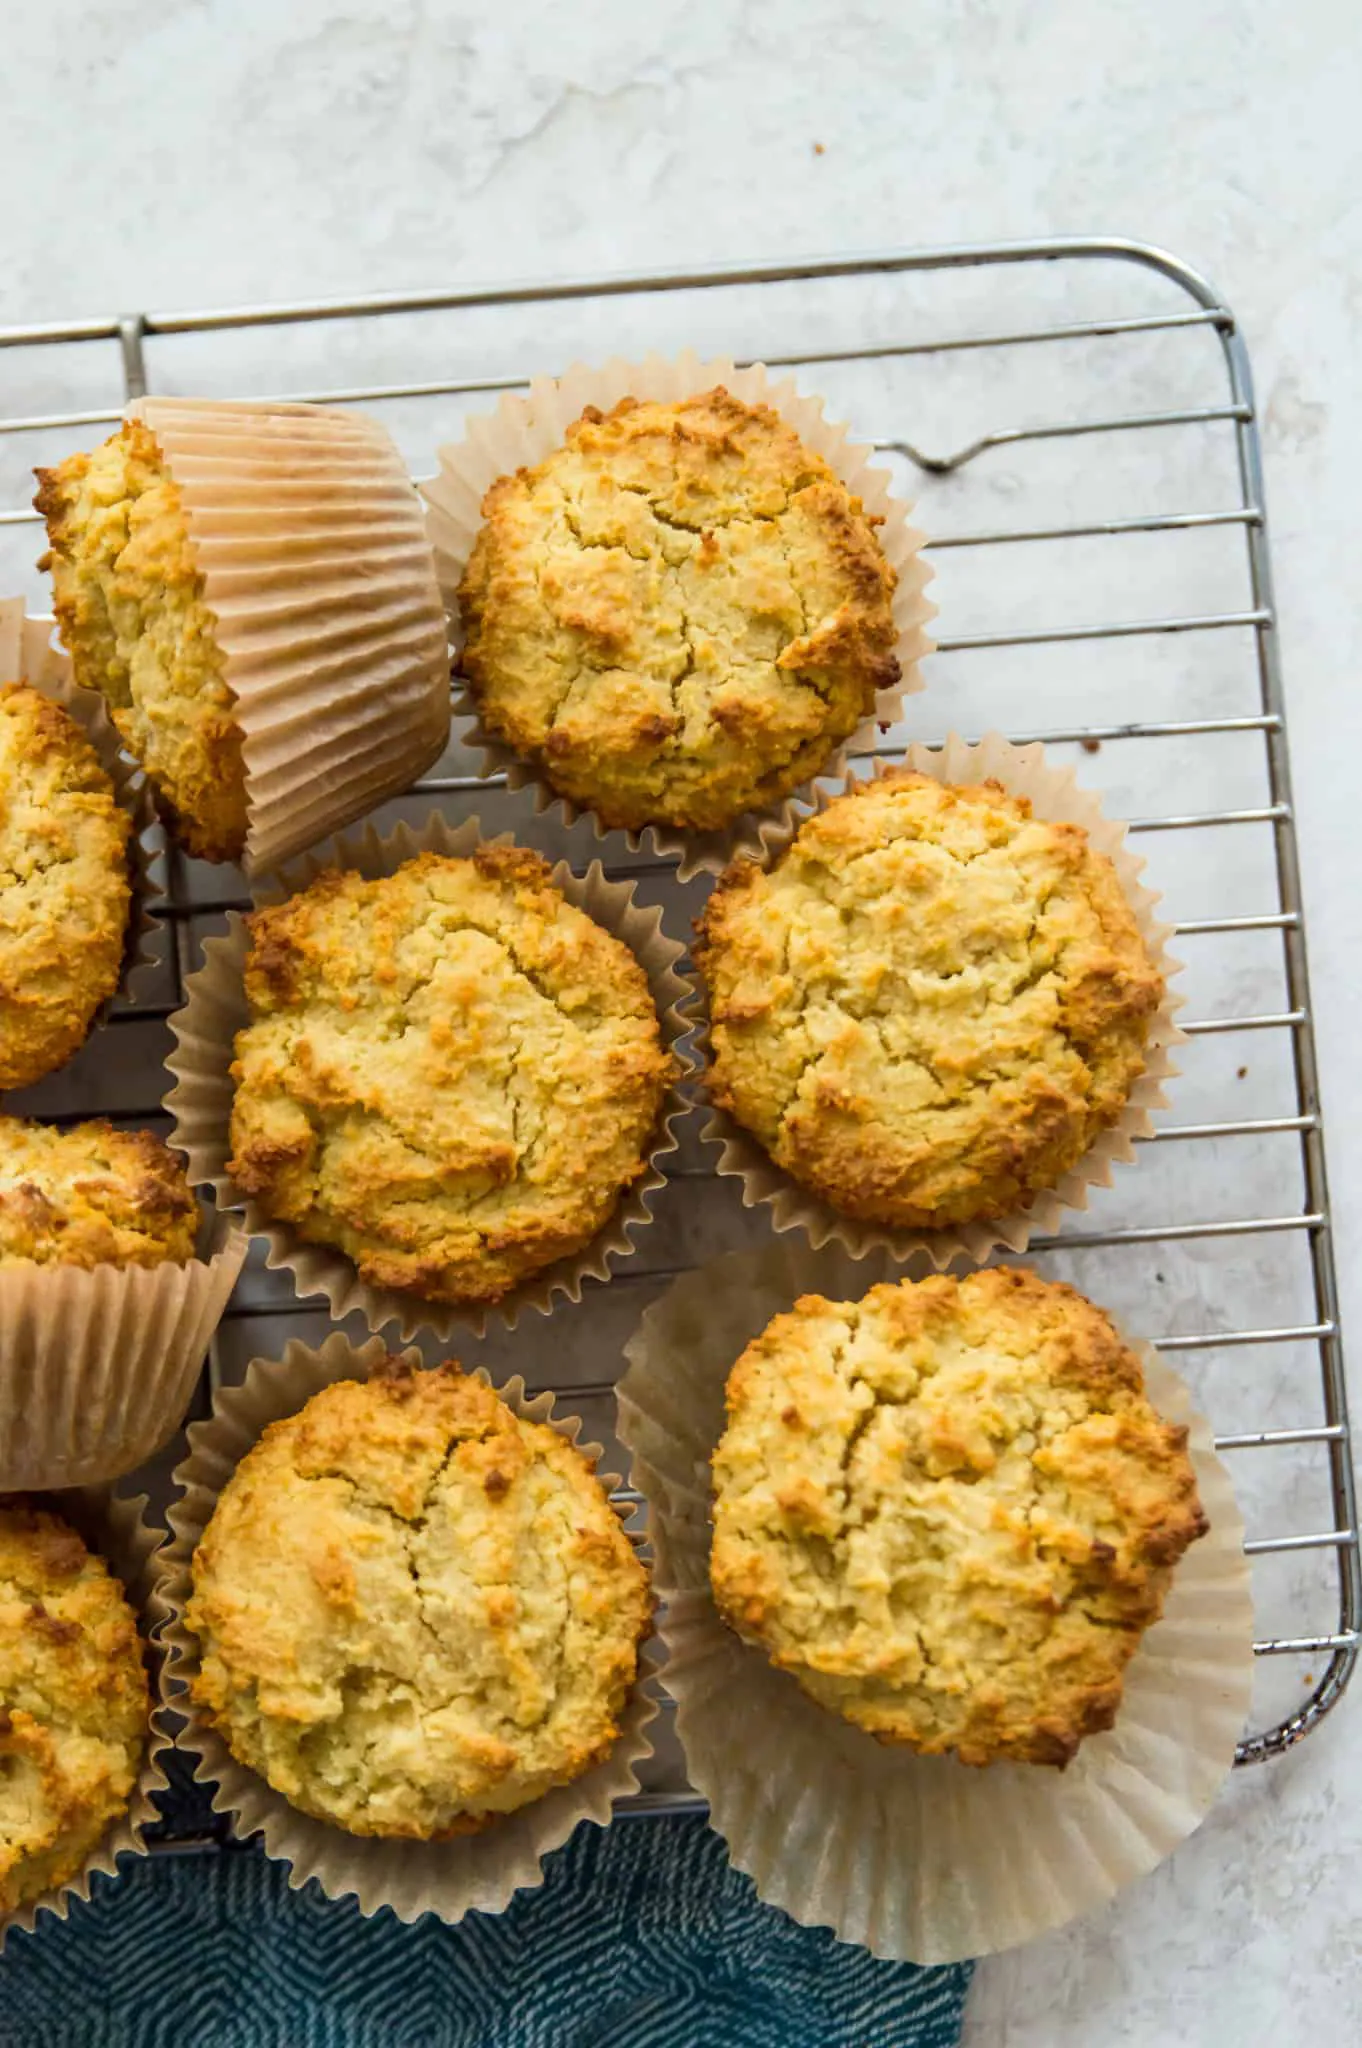 An overhead view of paleo cornbread muffins on a wire rack